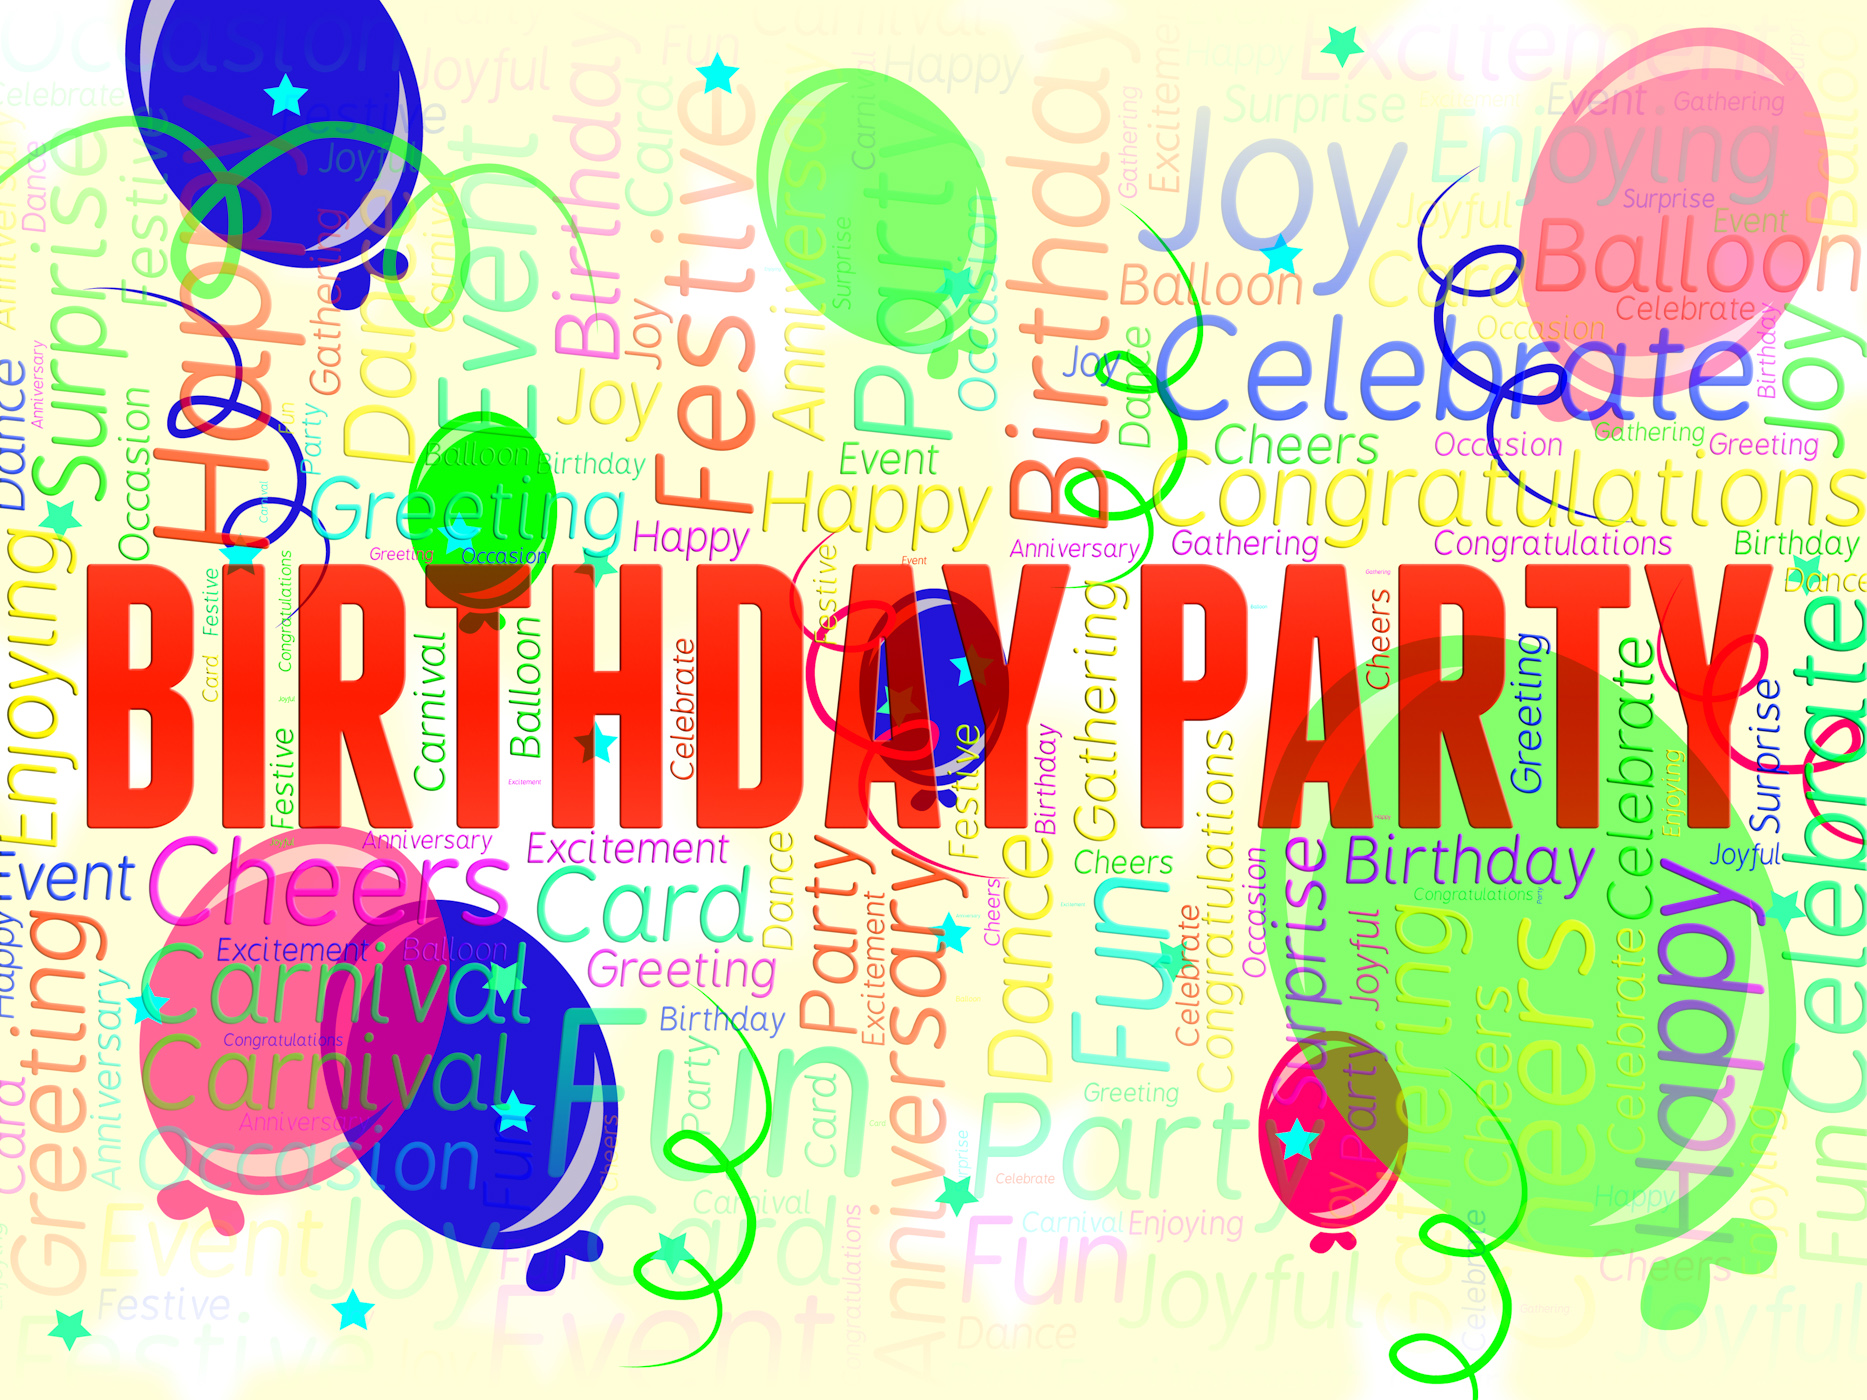 Birthday Party Means Parties Fun And Greeting, Birth, Fun, Parties, Joy, HQ Photo